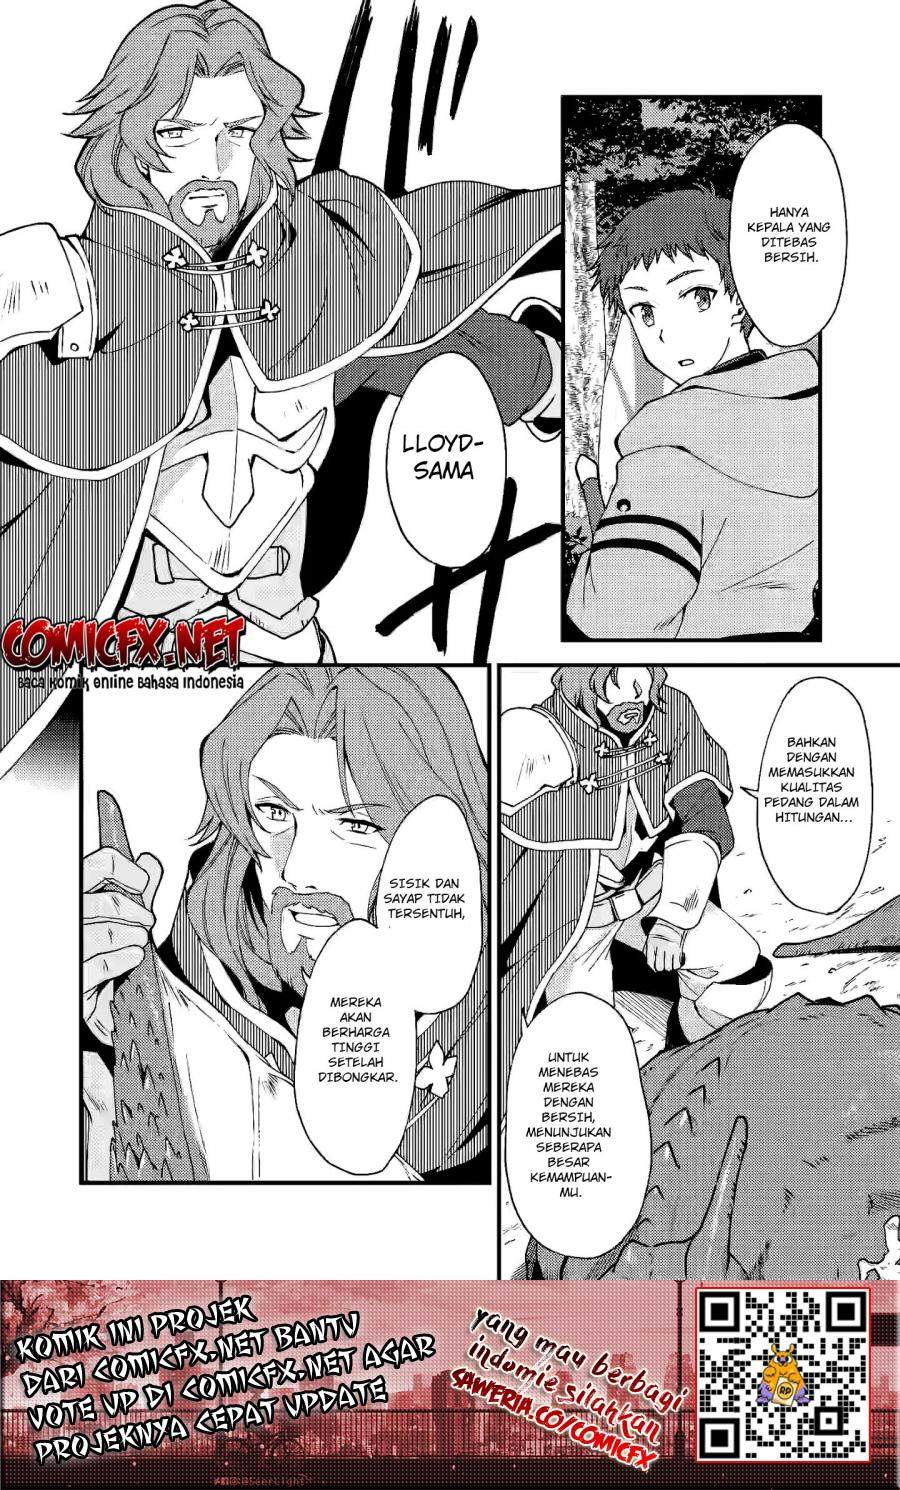 A Sword Master Childhood Friend Power Harassed Me Harshly, So I Broke off Our Relationship and Make a Fresh Start at the Frontier as a Magic Swordsman Chapter 7.1 8